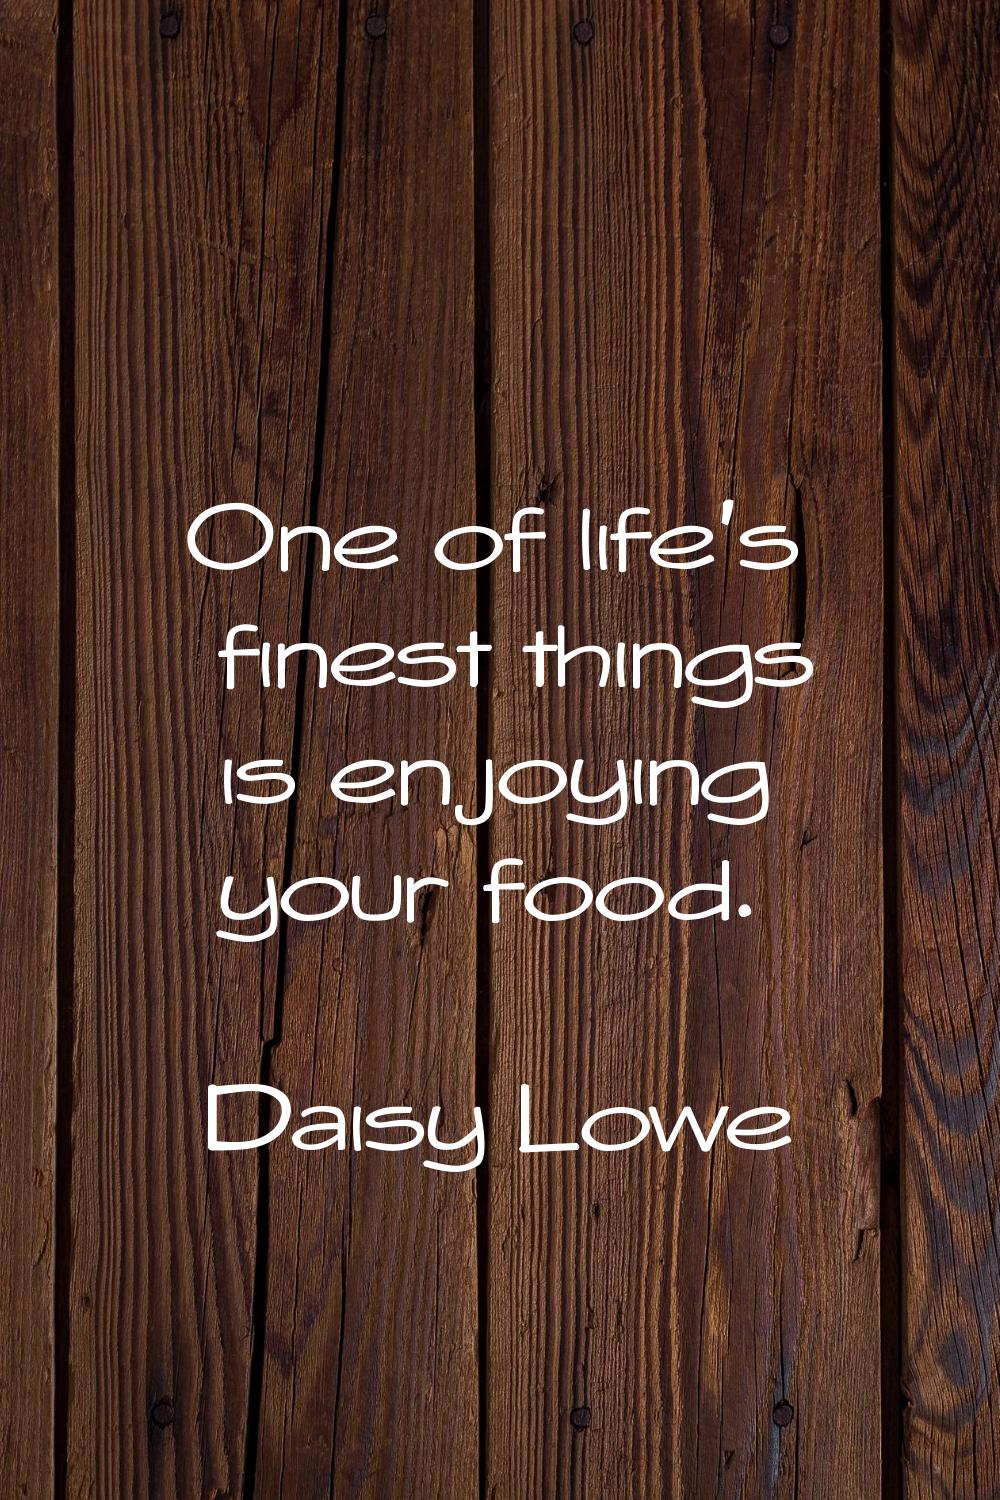 One of life's finest things is enjoying your food.